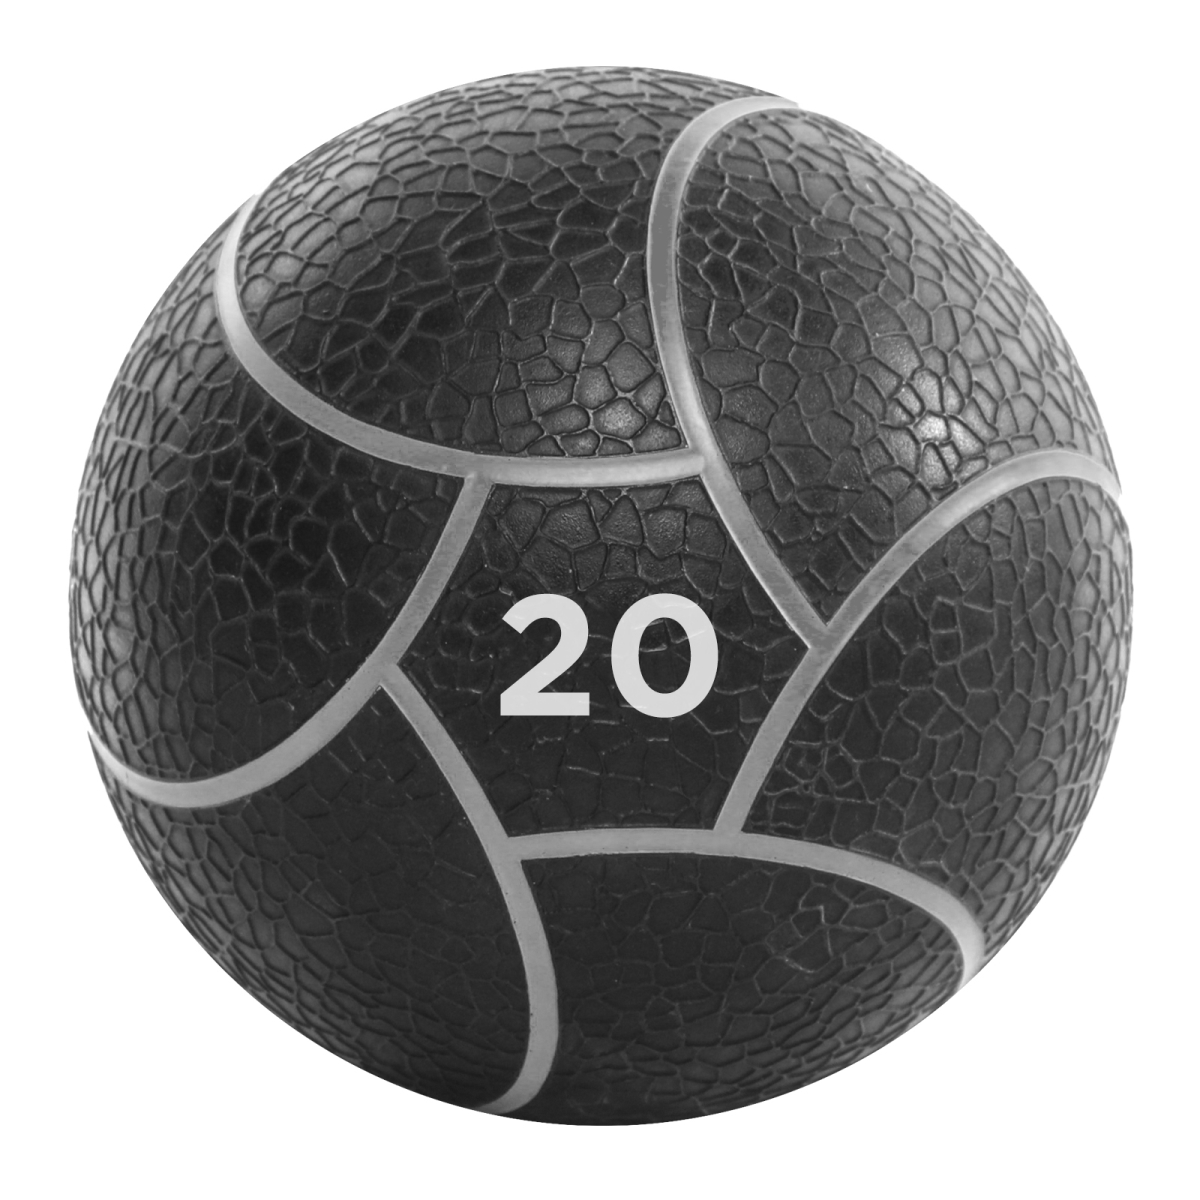 Picture of Power Systems 25720 Elite Power Med Ball Prime 20 lb. Gray